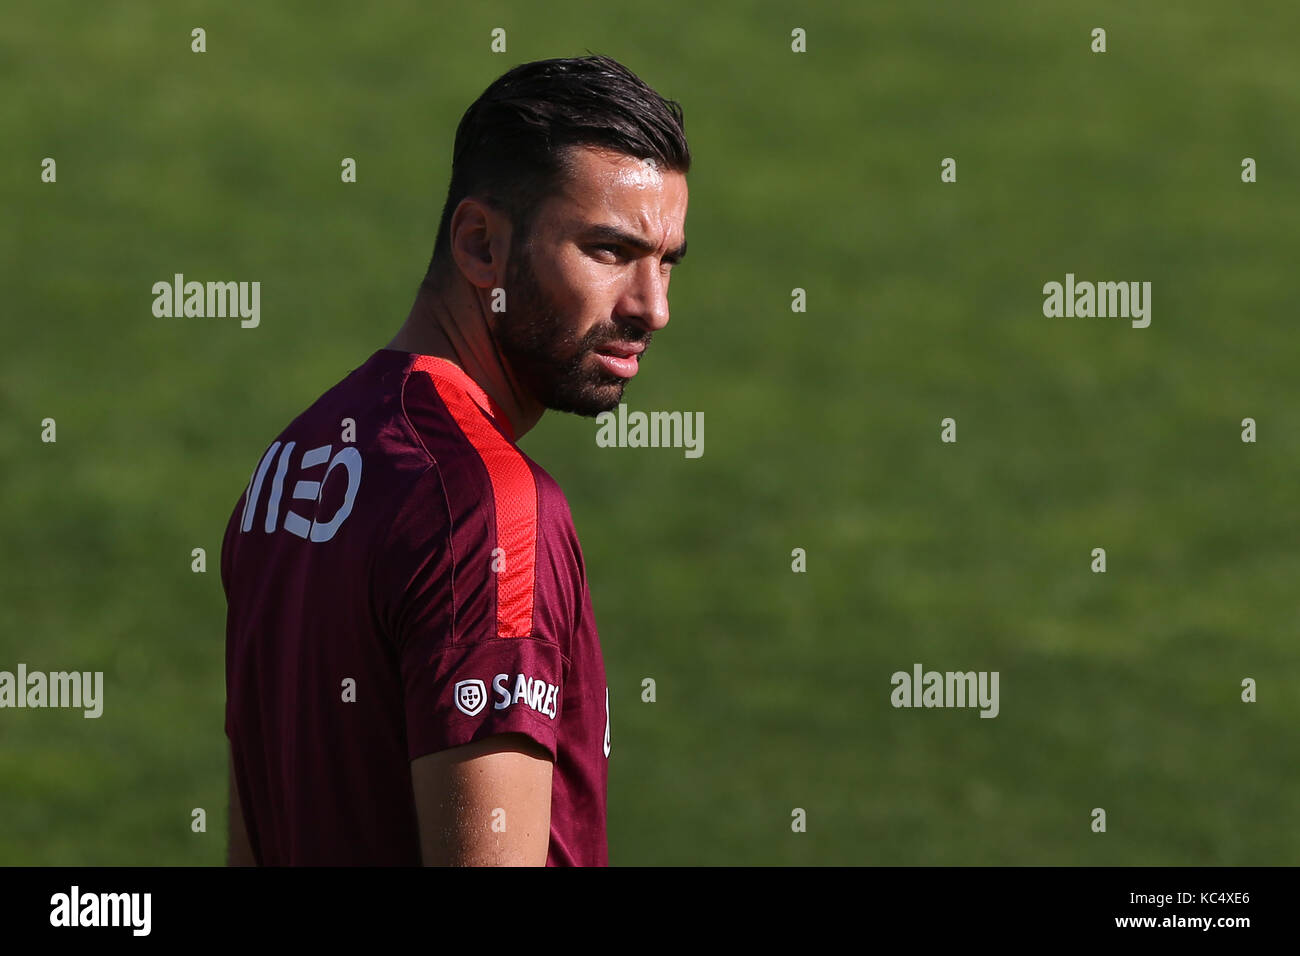 Lisbon, Portugal. 3rd Oct, 2017. Portugal's goalkeeper Rui Patricio during National Team Training session before the match between Portugal and Andorra at City Football in Oeiras, Lisbon on October 3, 2017. Credit: Bruno Barros/Alamy Live News Stock Photo